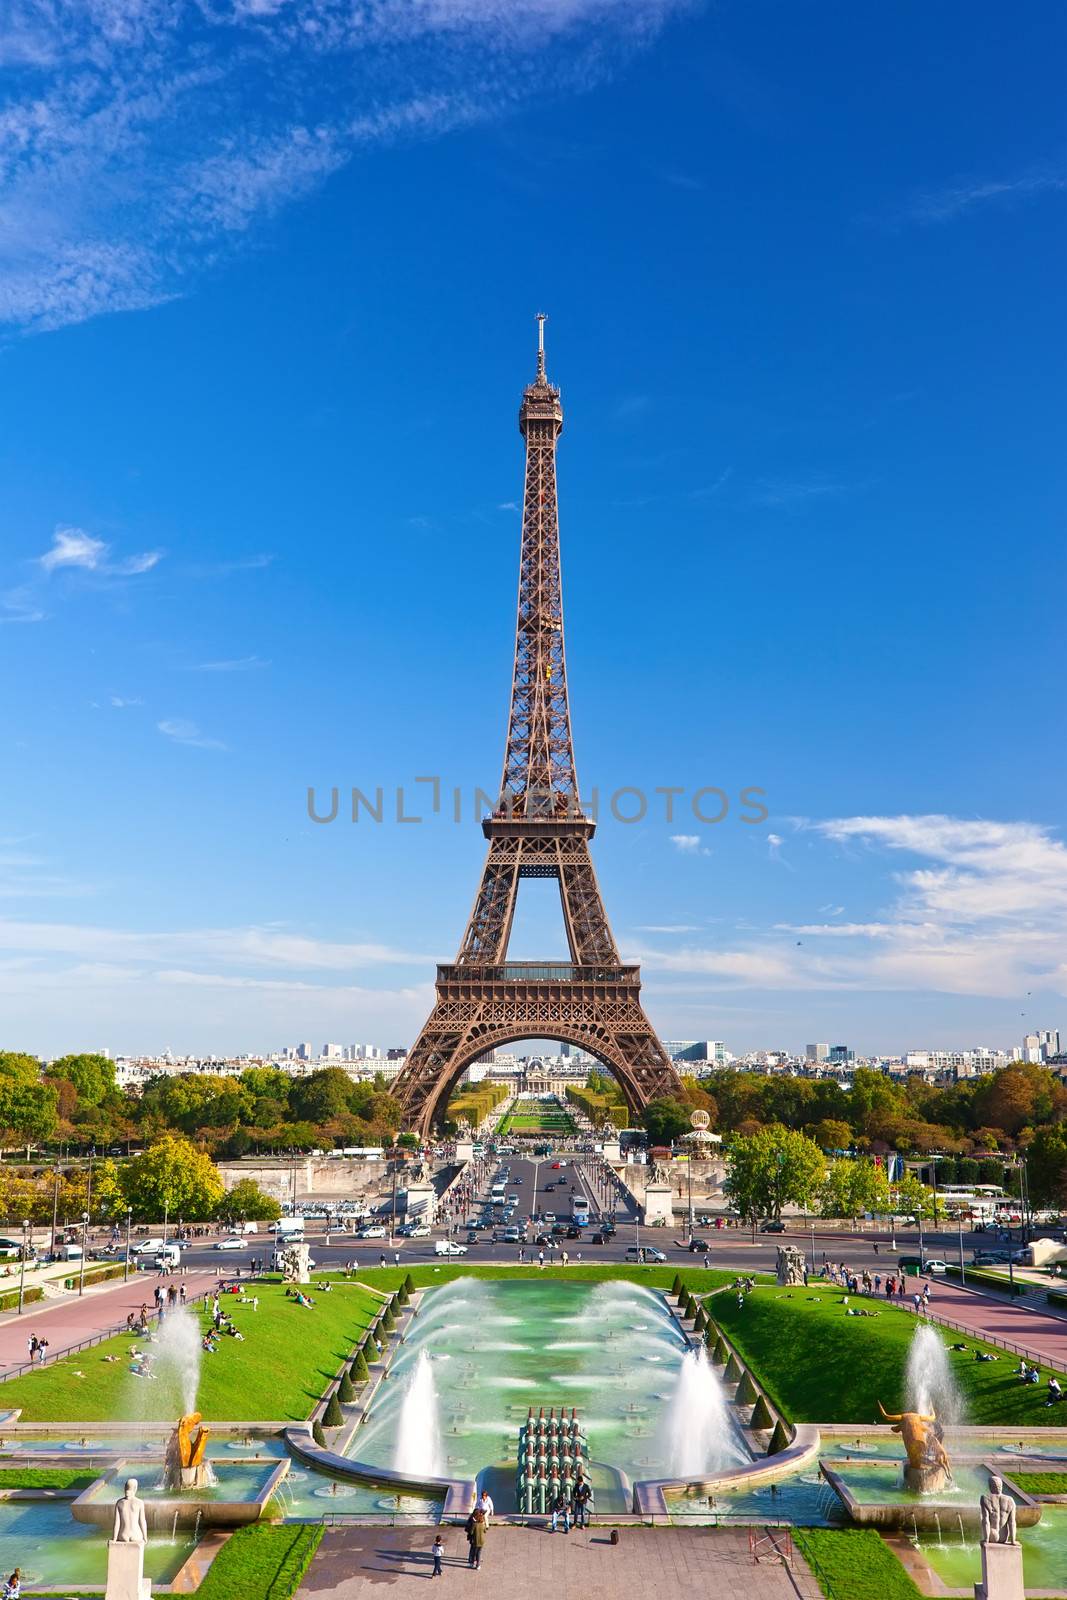 Beautiful view of famous Eiffel Tower in Paris, France